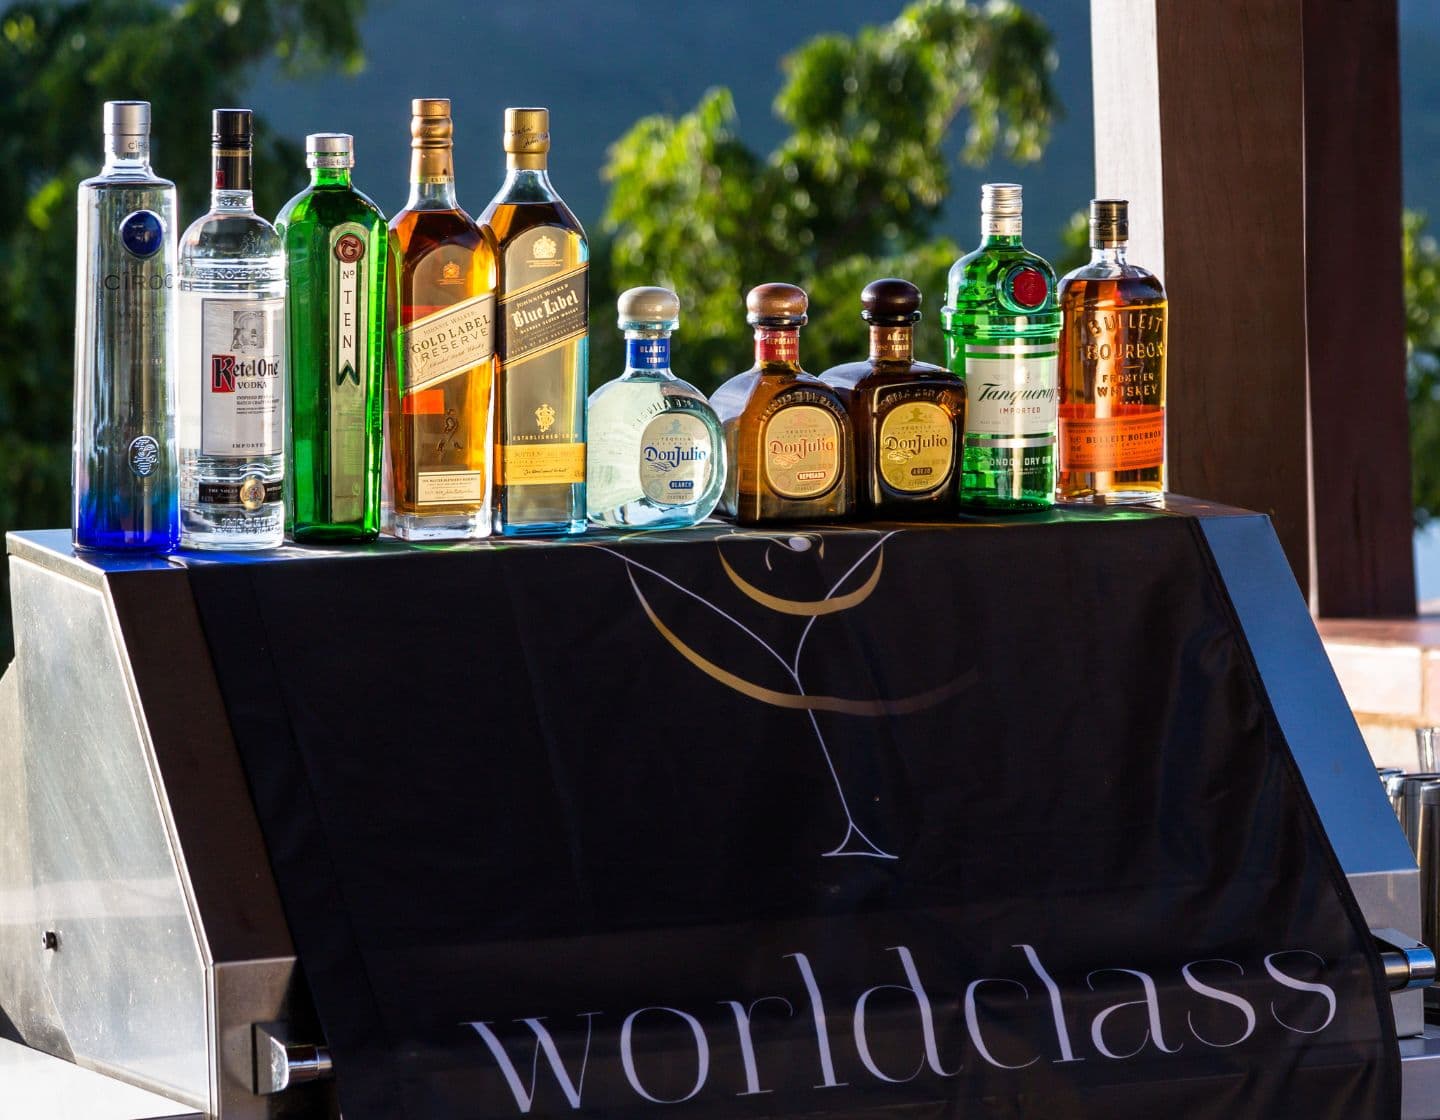 Lineup of Diageo spirits in the sun on a World Class banner    